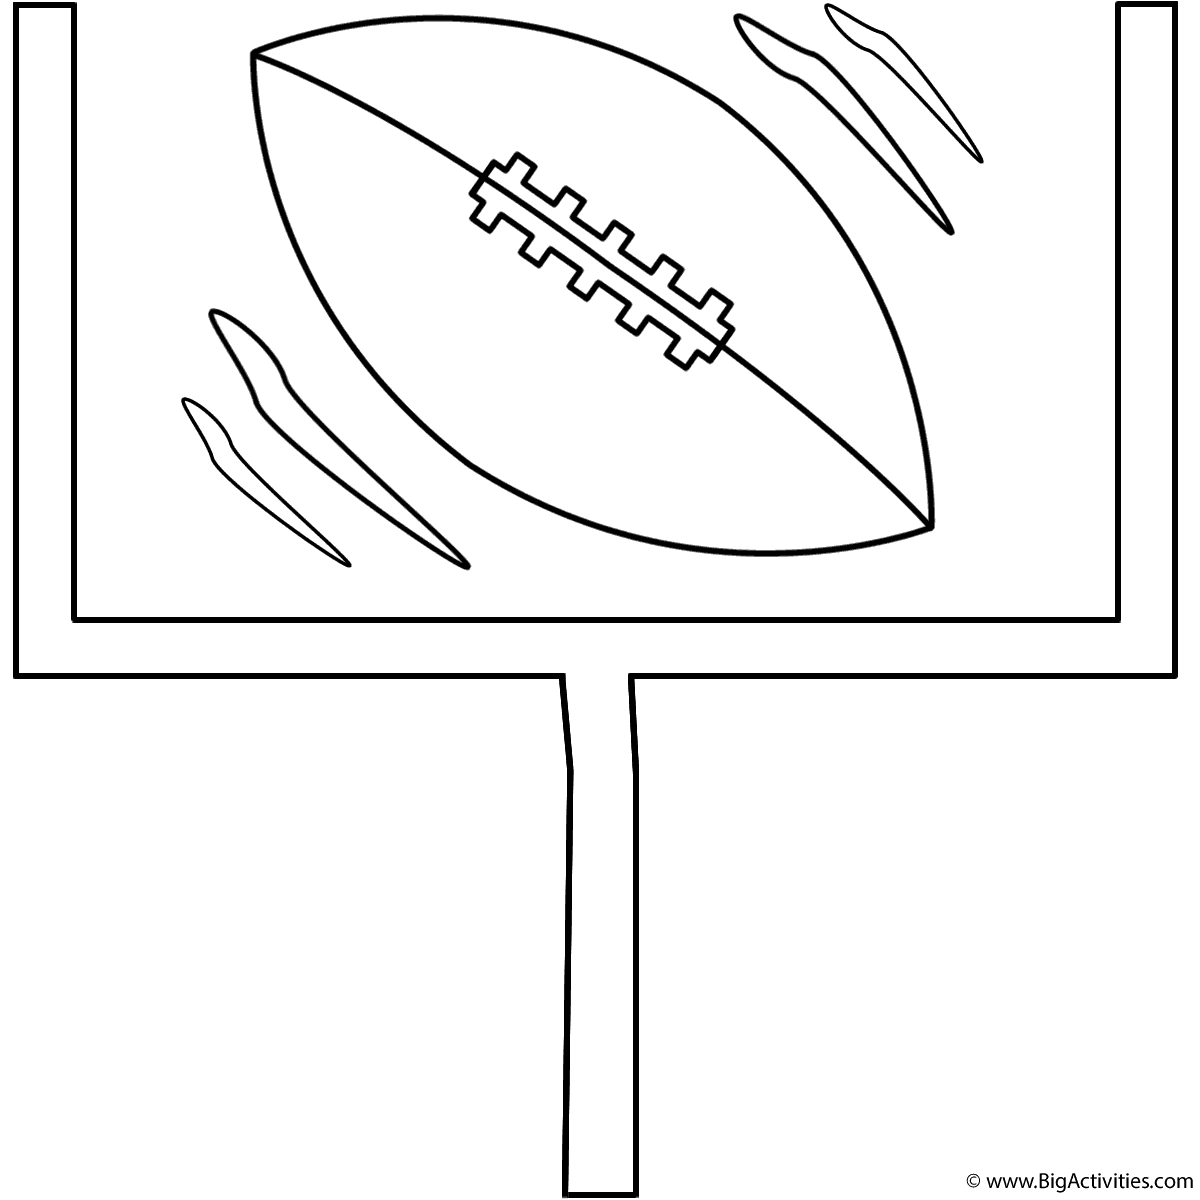 Football going through goal post - Coloring Page (Grey Cup)